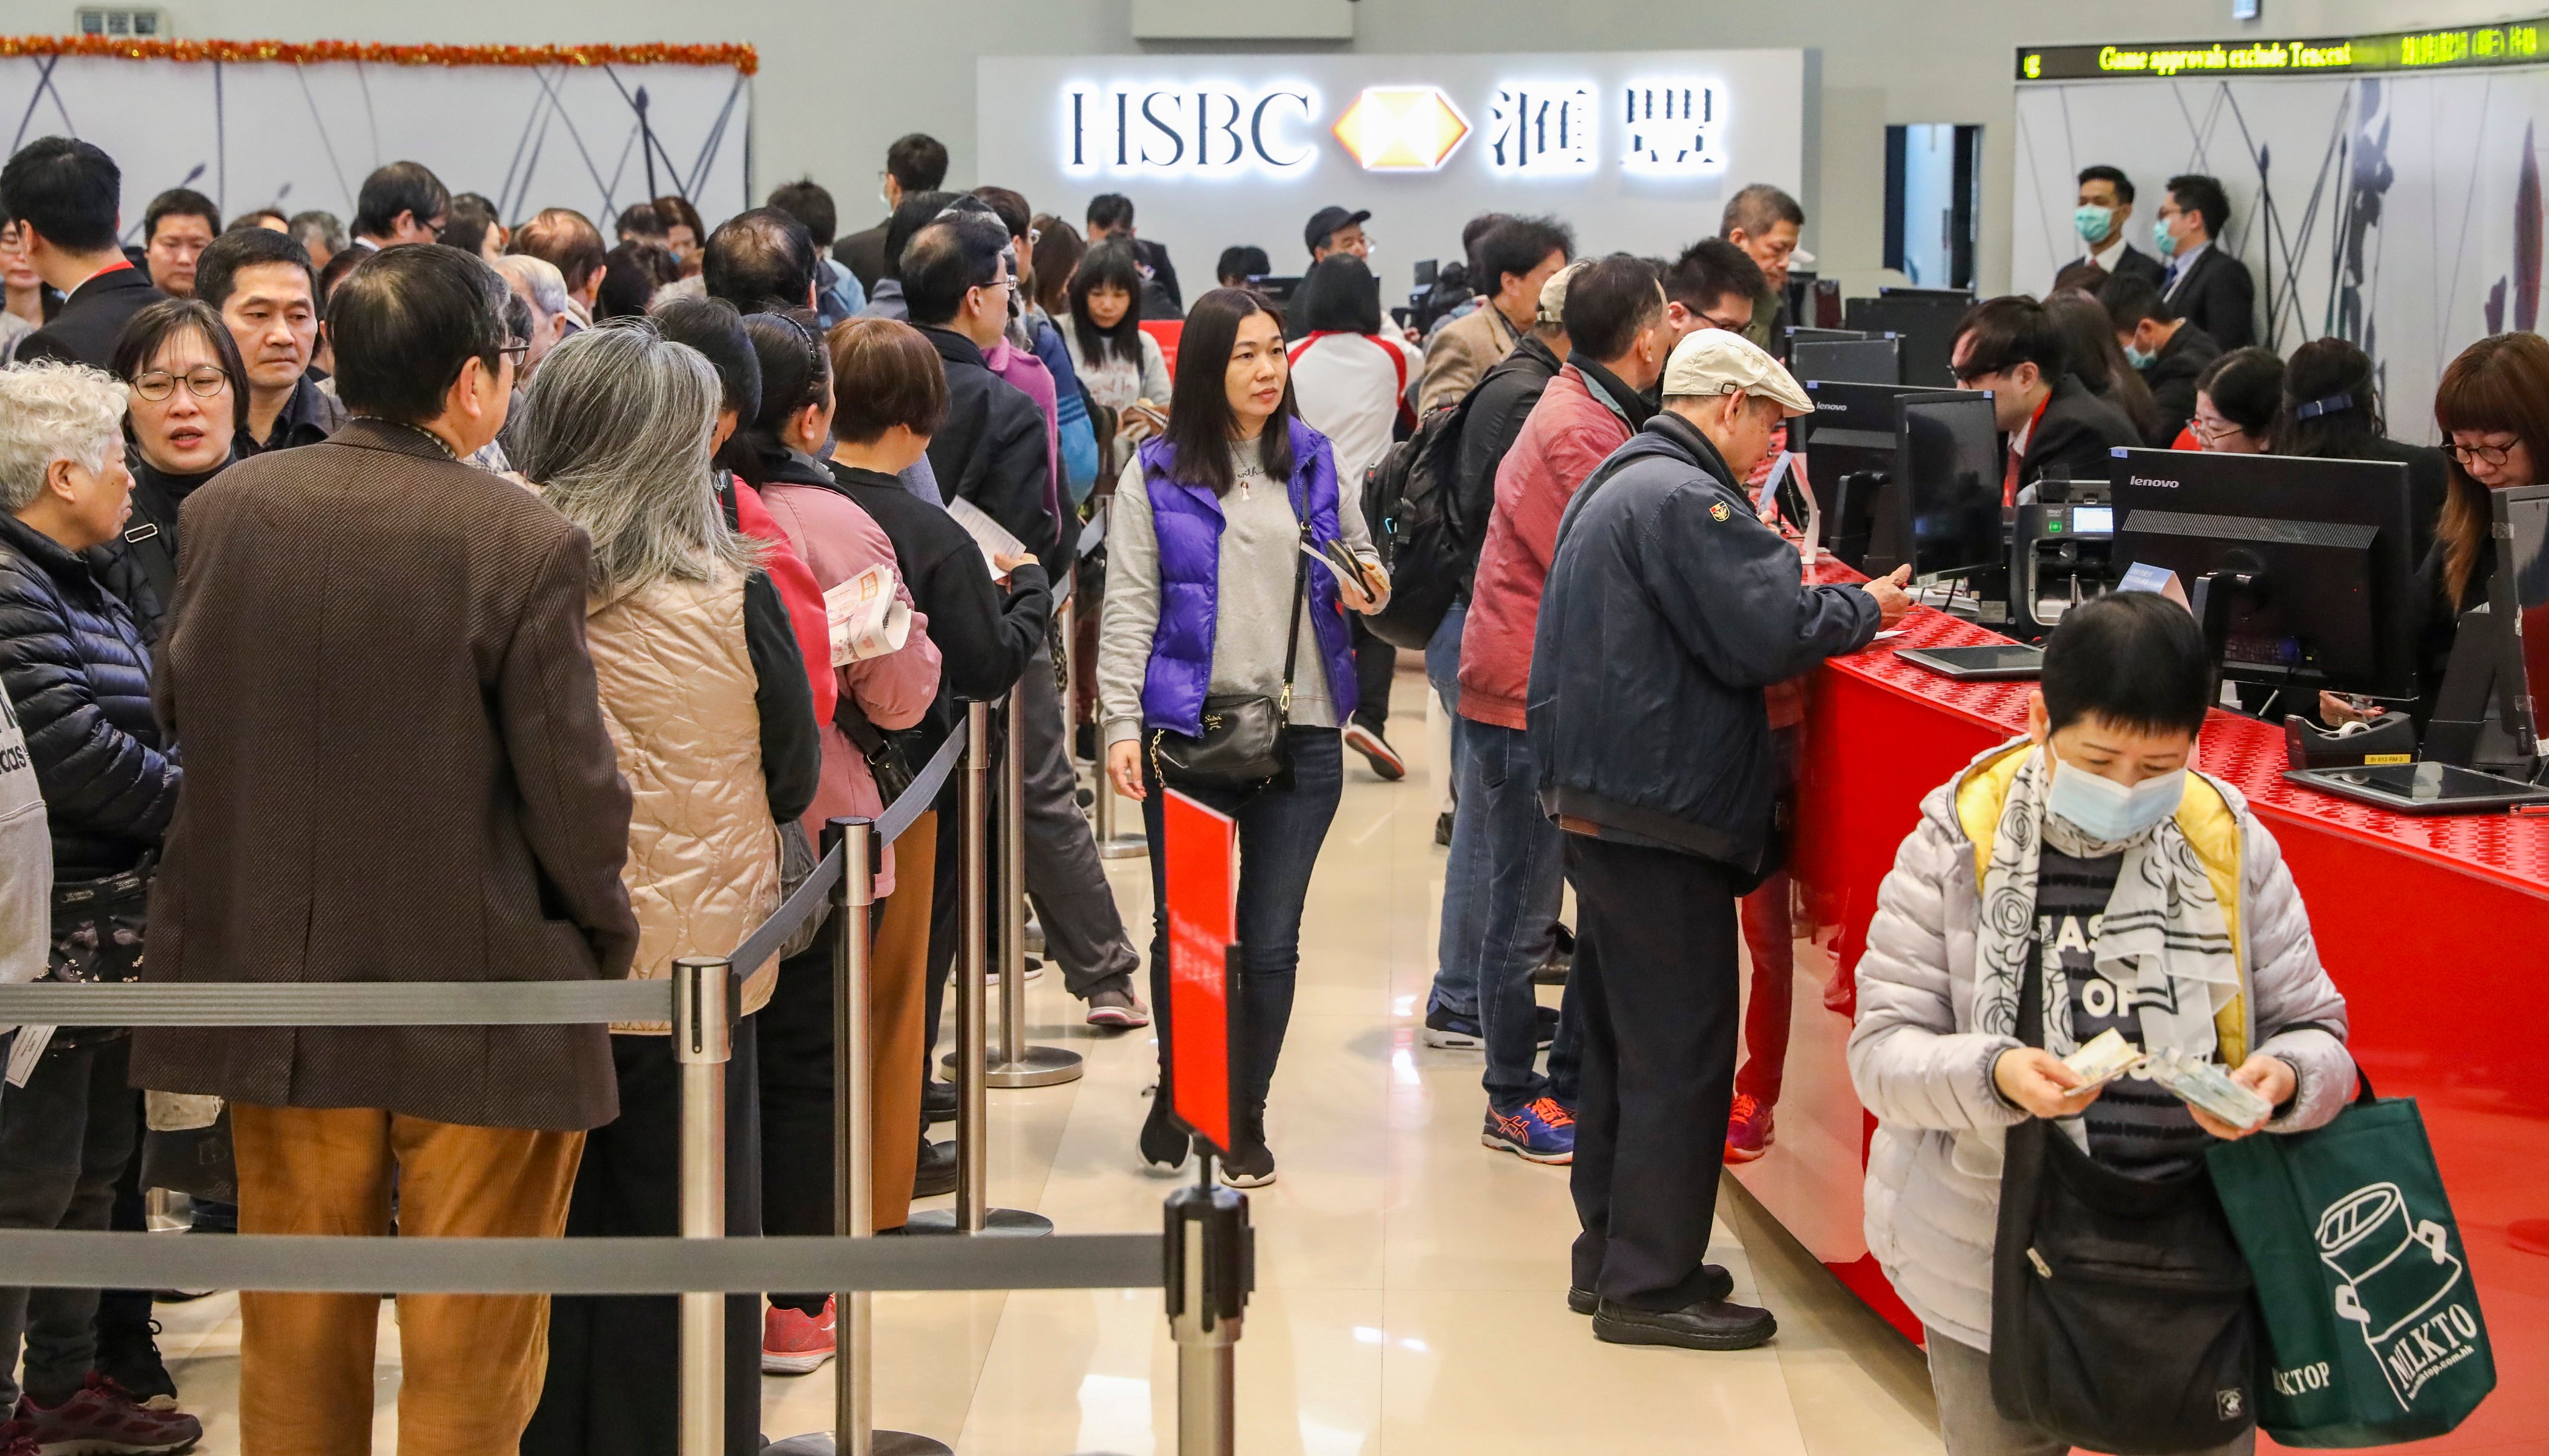 Hong Kong residents queued for new banknotes for Chinese New Year (CNY) red packets at the HSBC branch in Mong Kok on 23 January 2019. Photo: K. Y. Cheng